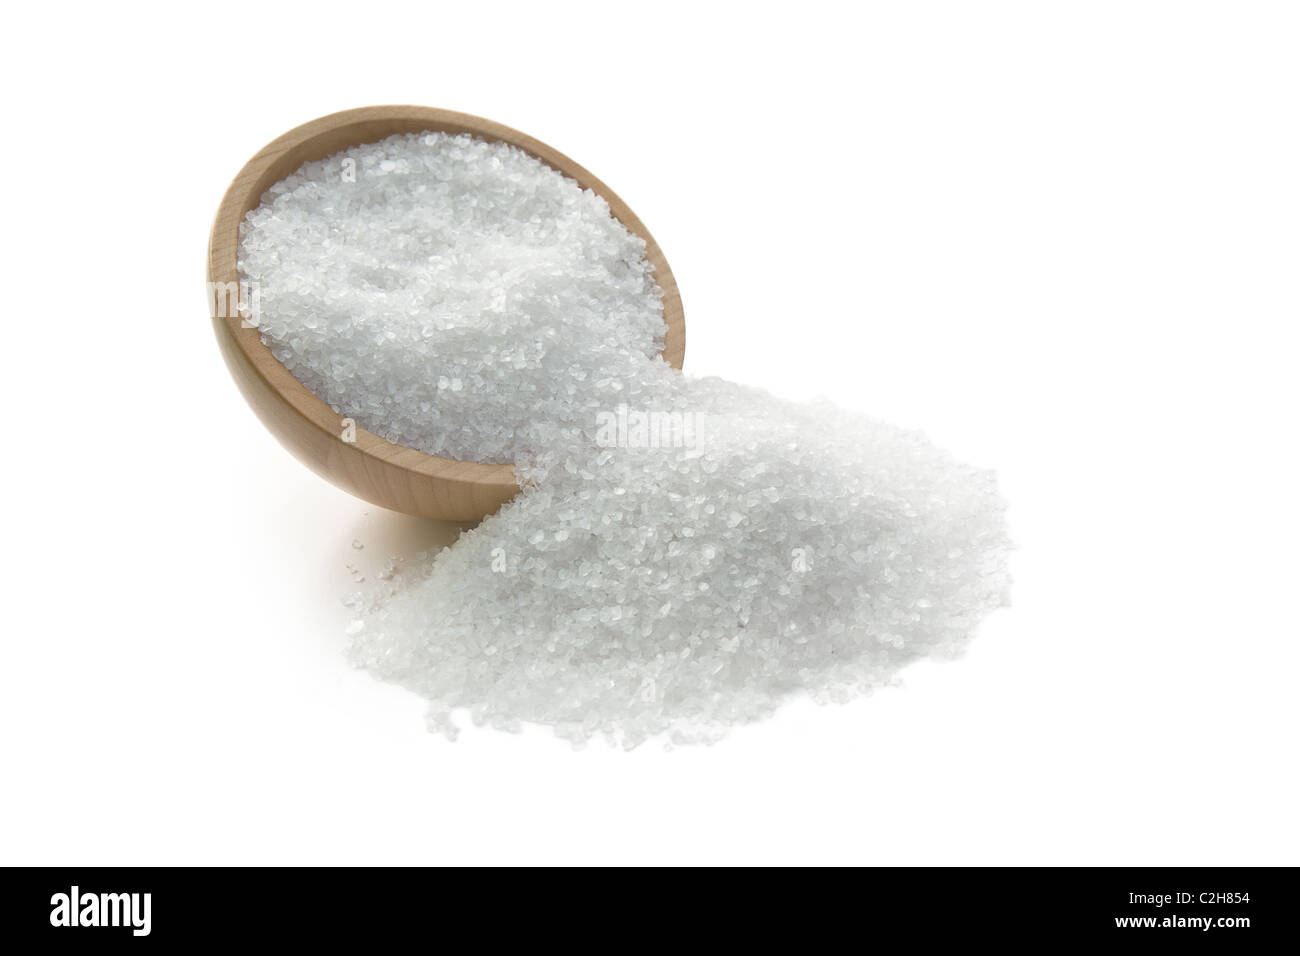 salt crystals in wooden bowl Stock Photo